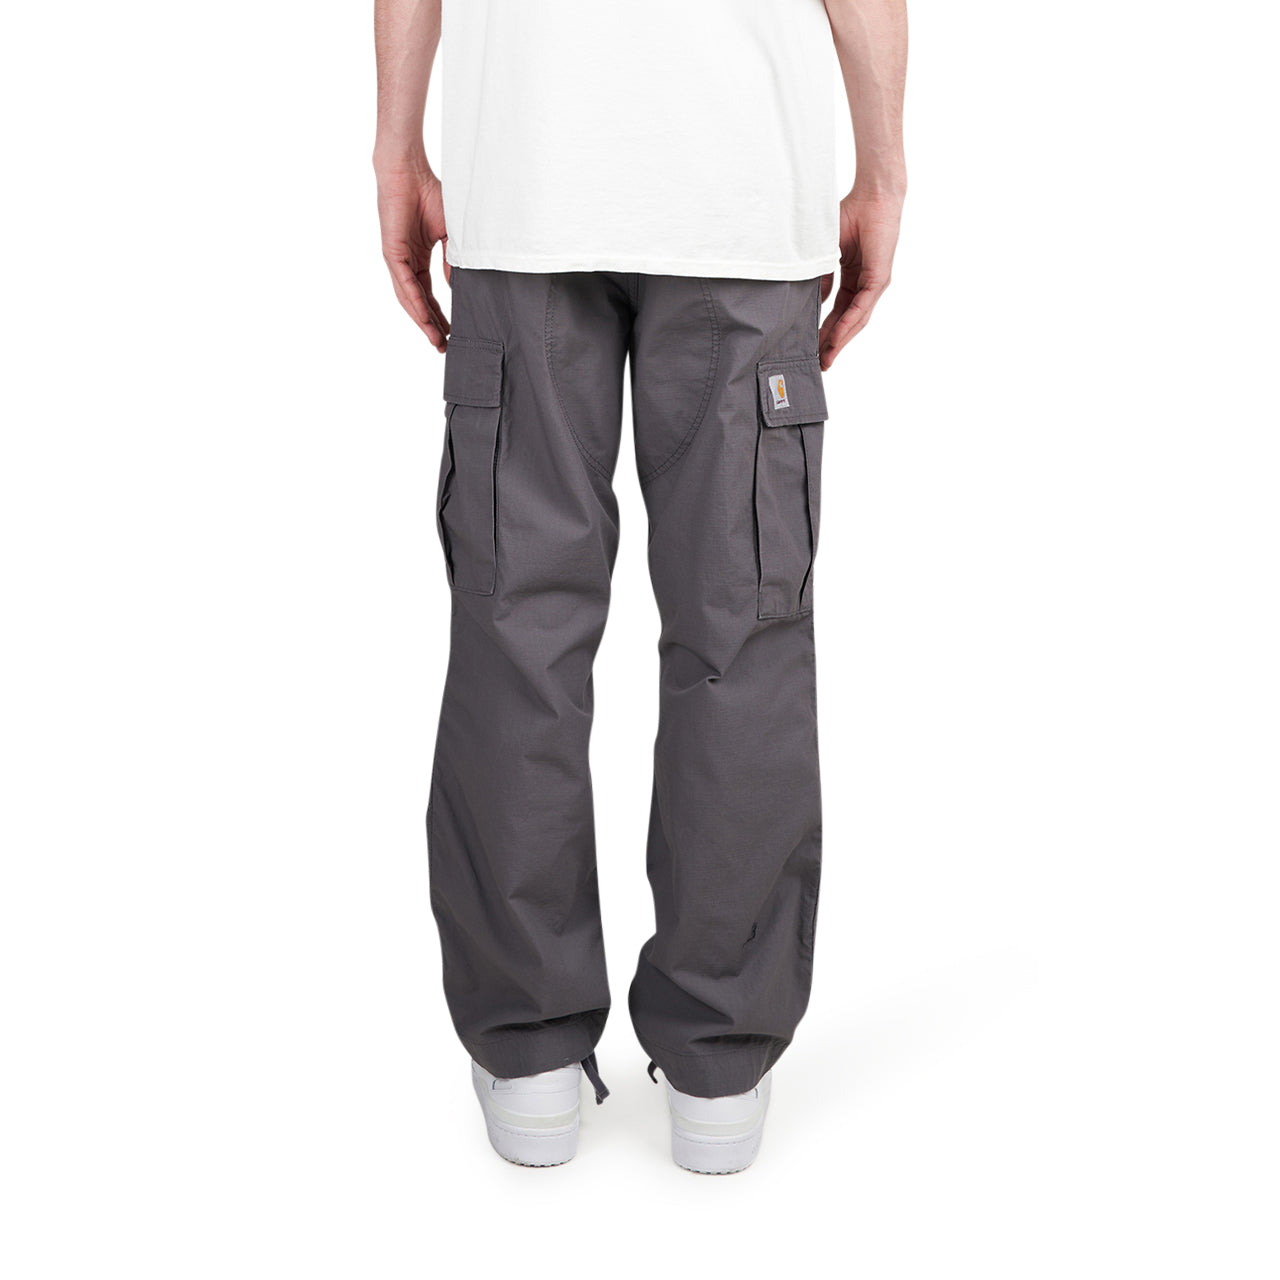 Carhartt cargo pants  Trousers women outfit Carhartt cargo pants Carhartt  womens outfit